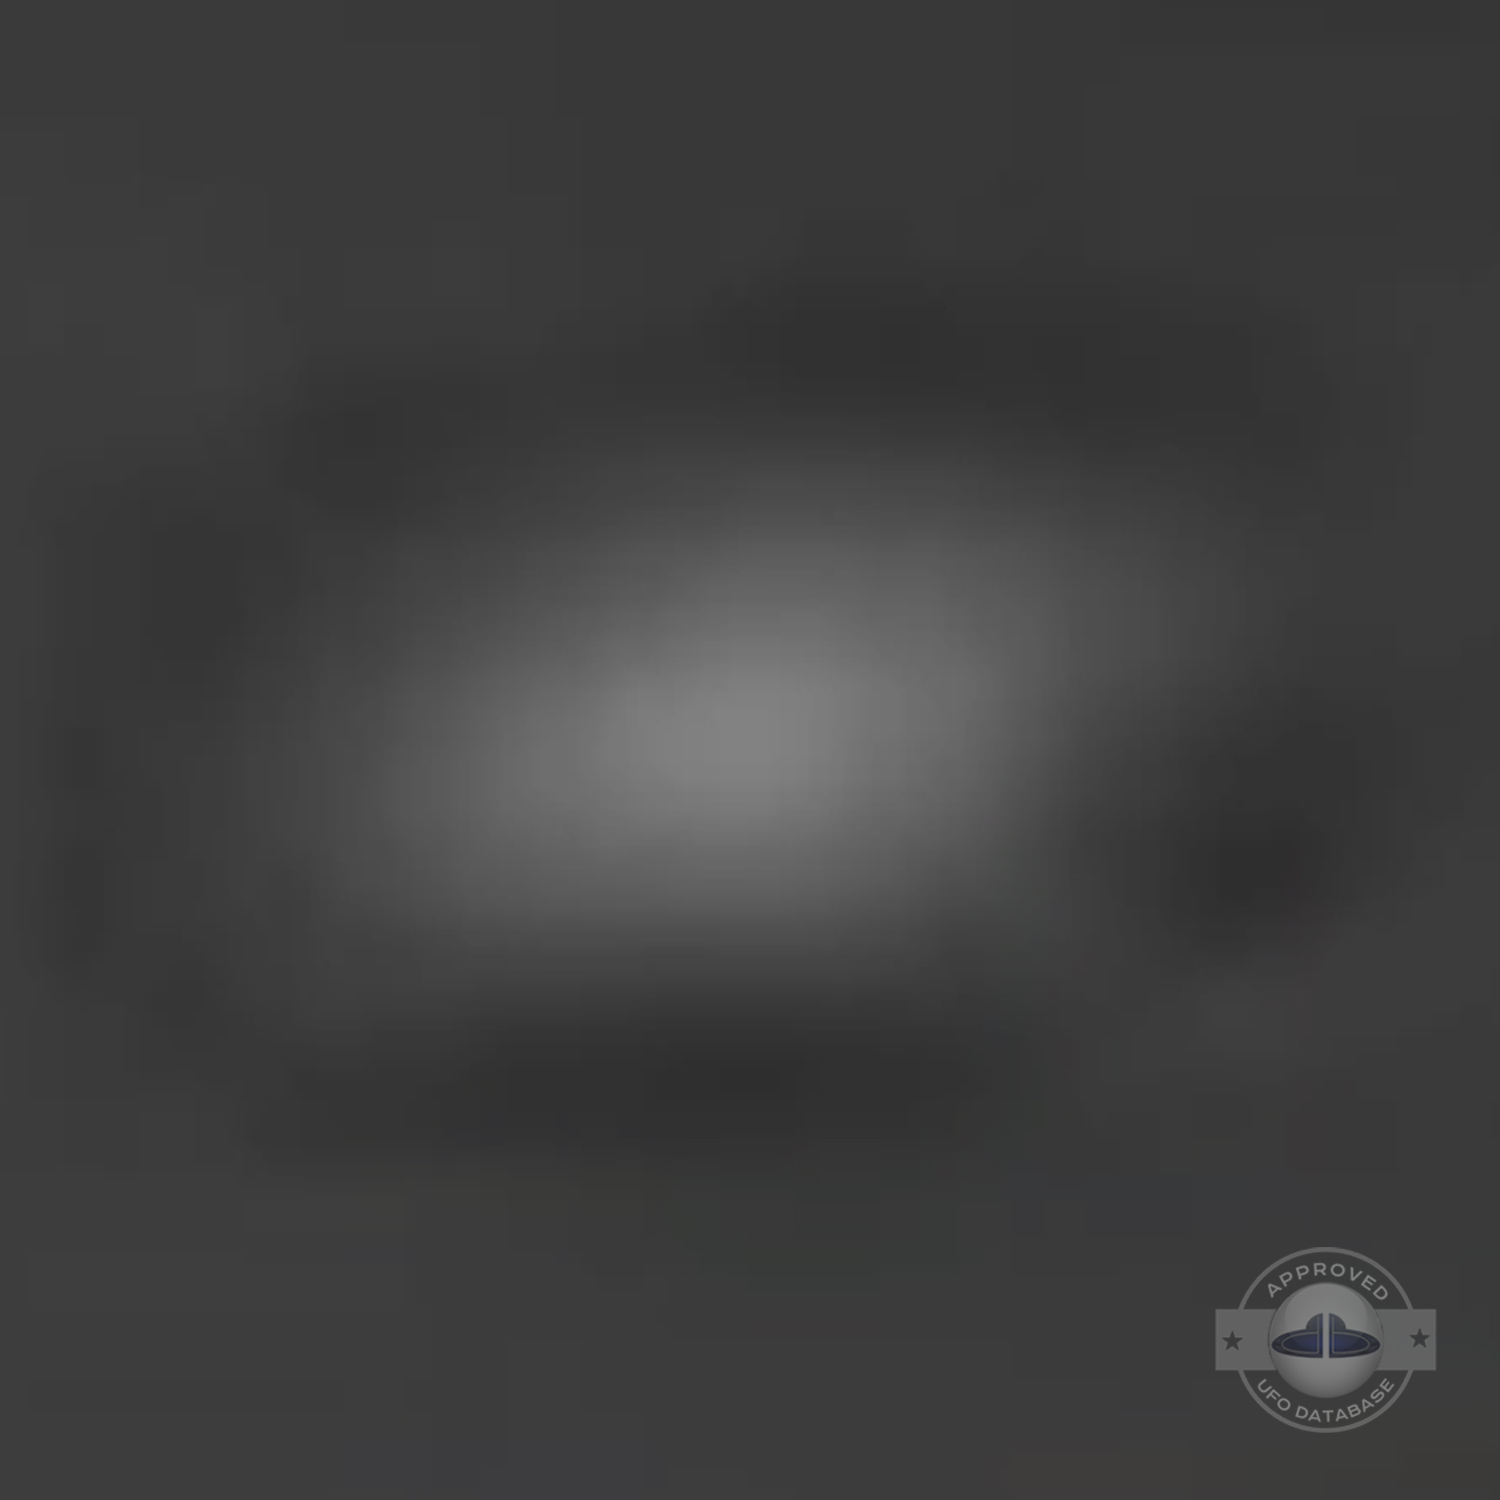 China UFO Sighting | Kunming, Yunnan UFO picture | October 14 2010 UFO Picture #151-7